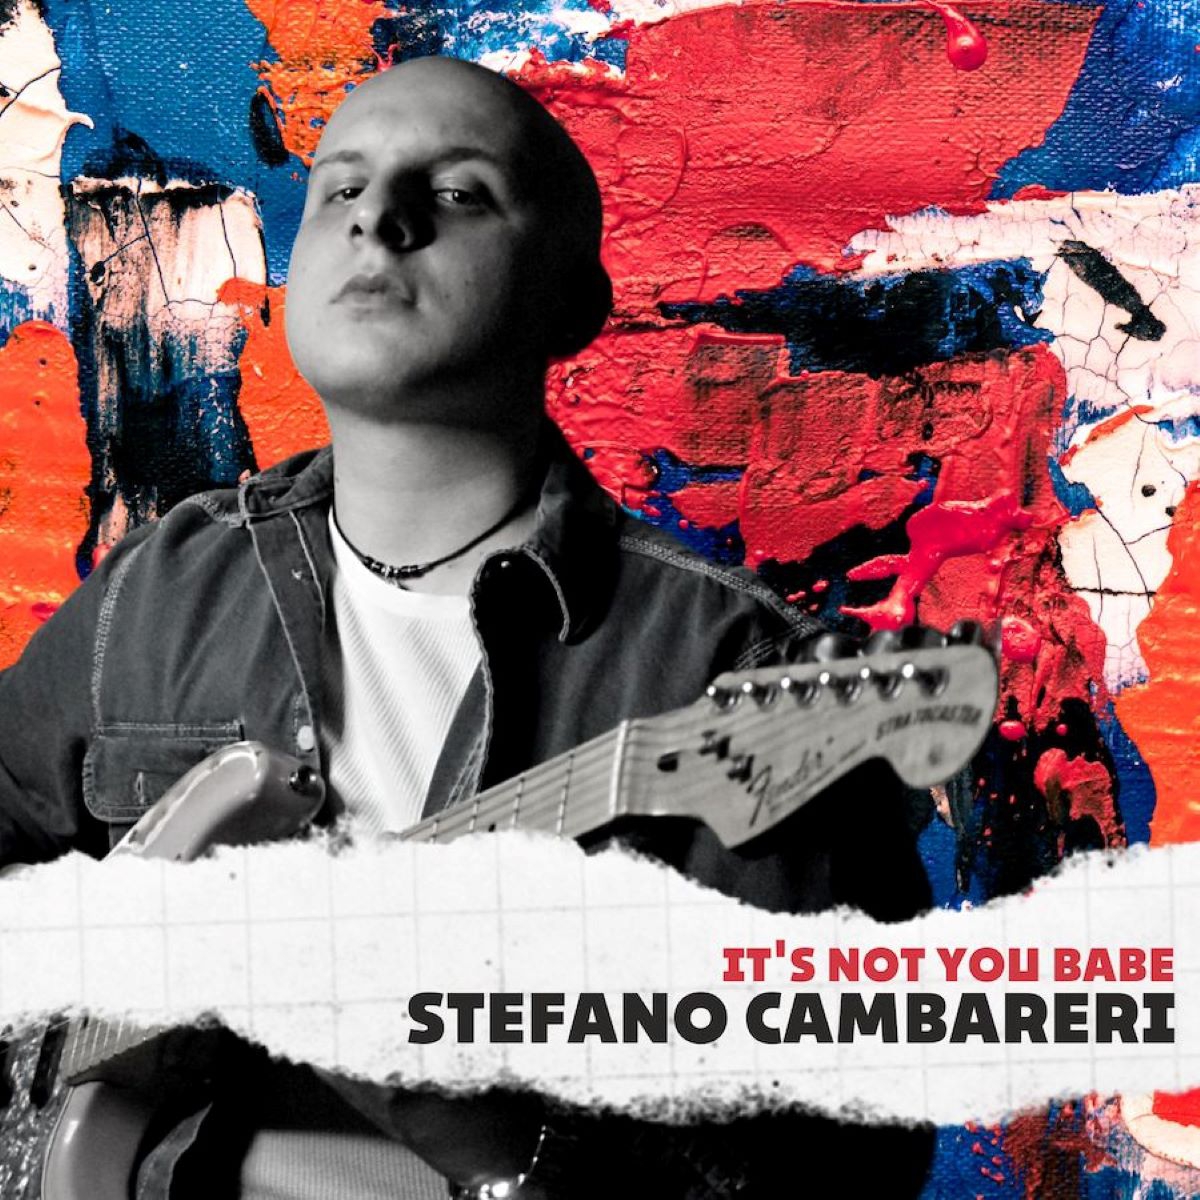 Stefano Cambareri - “It’s not you babe”